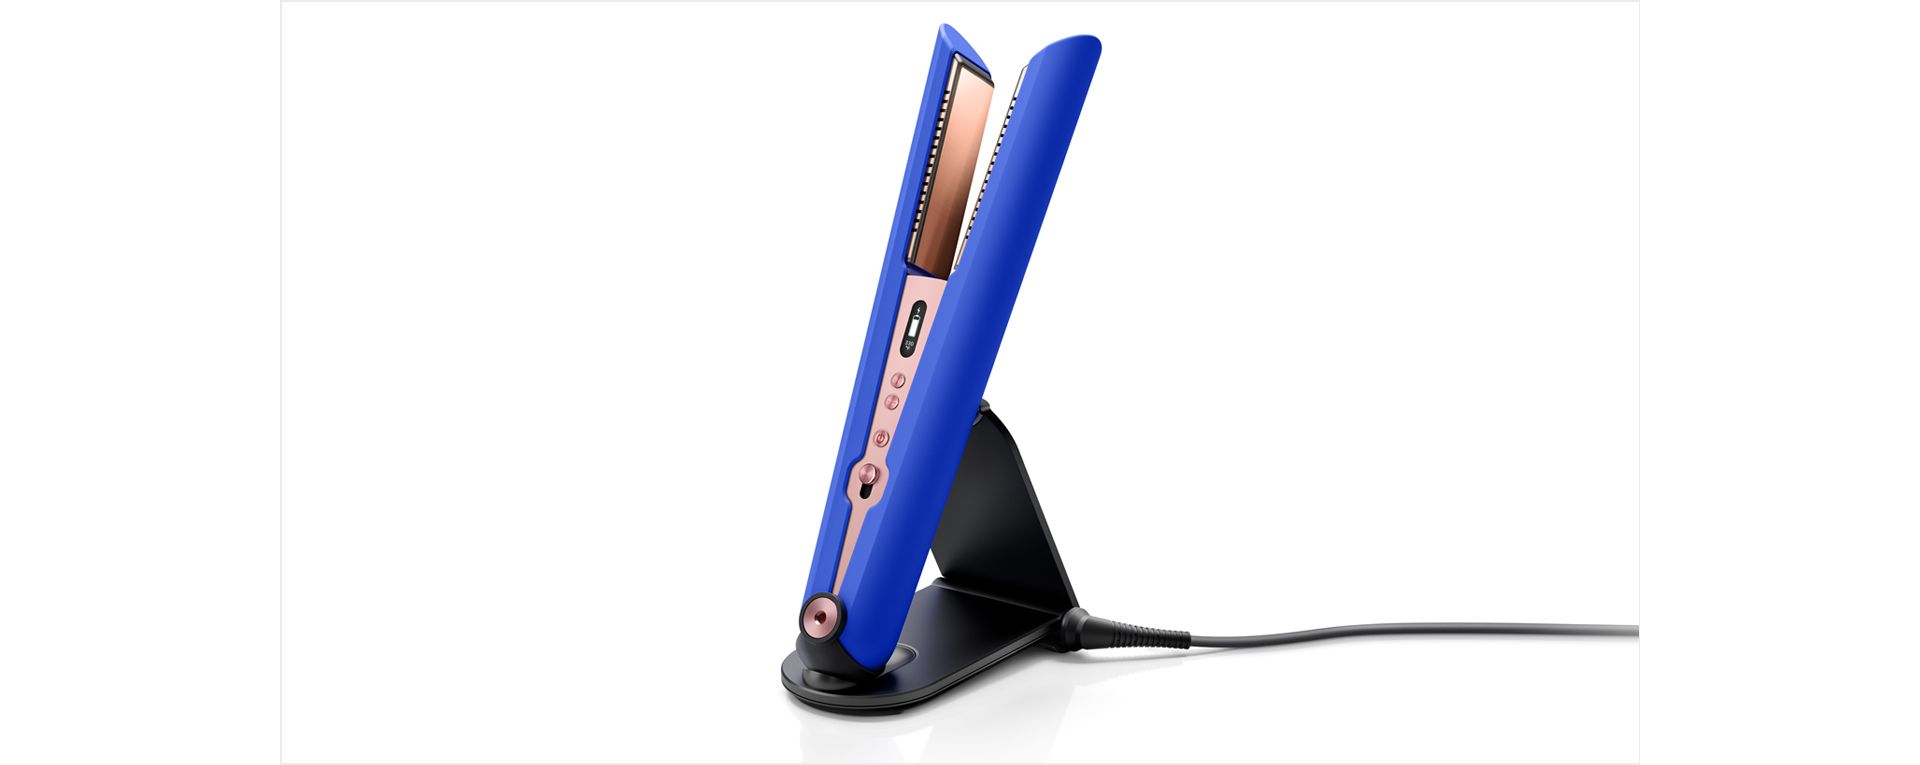 The Dyson Corrale straightener in its charging dock